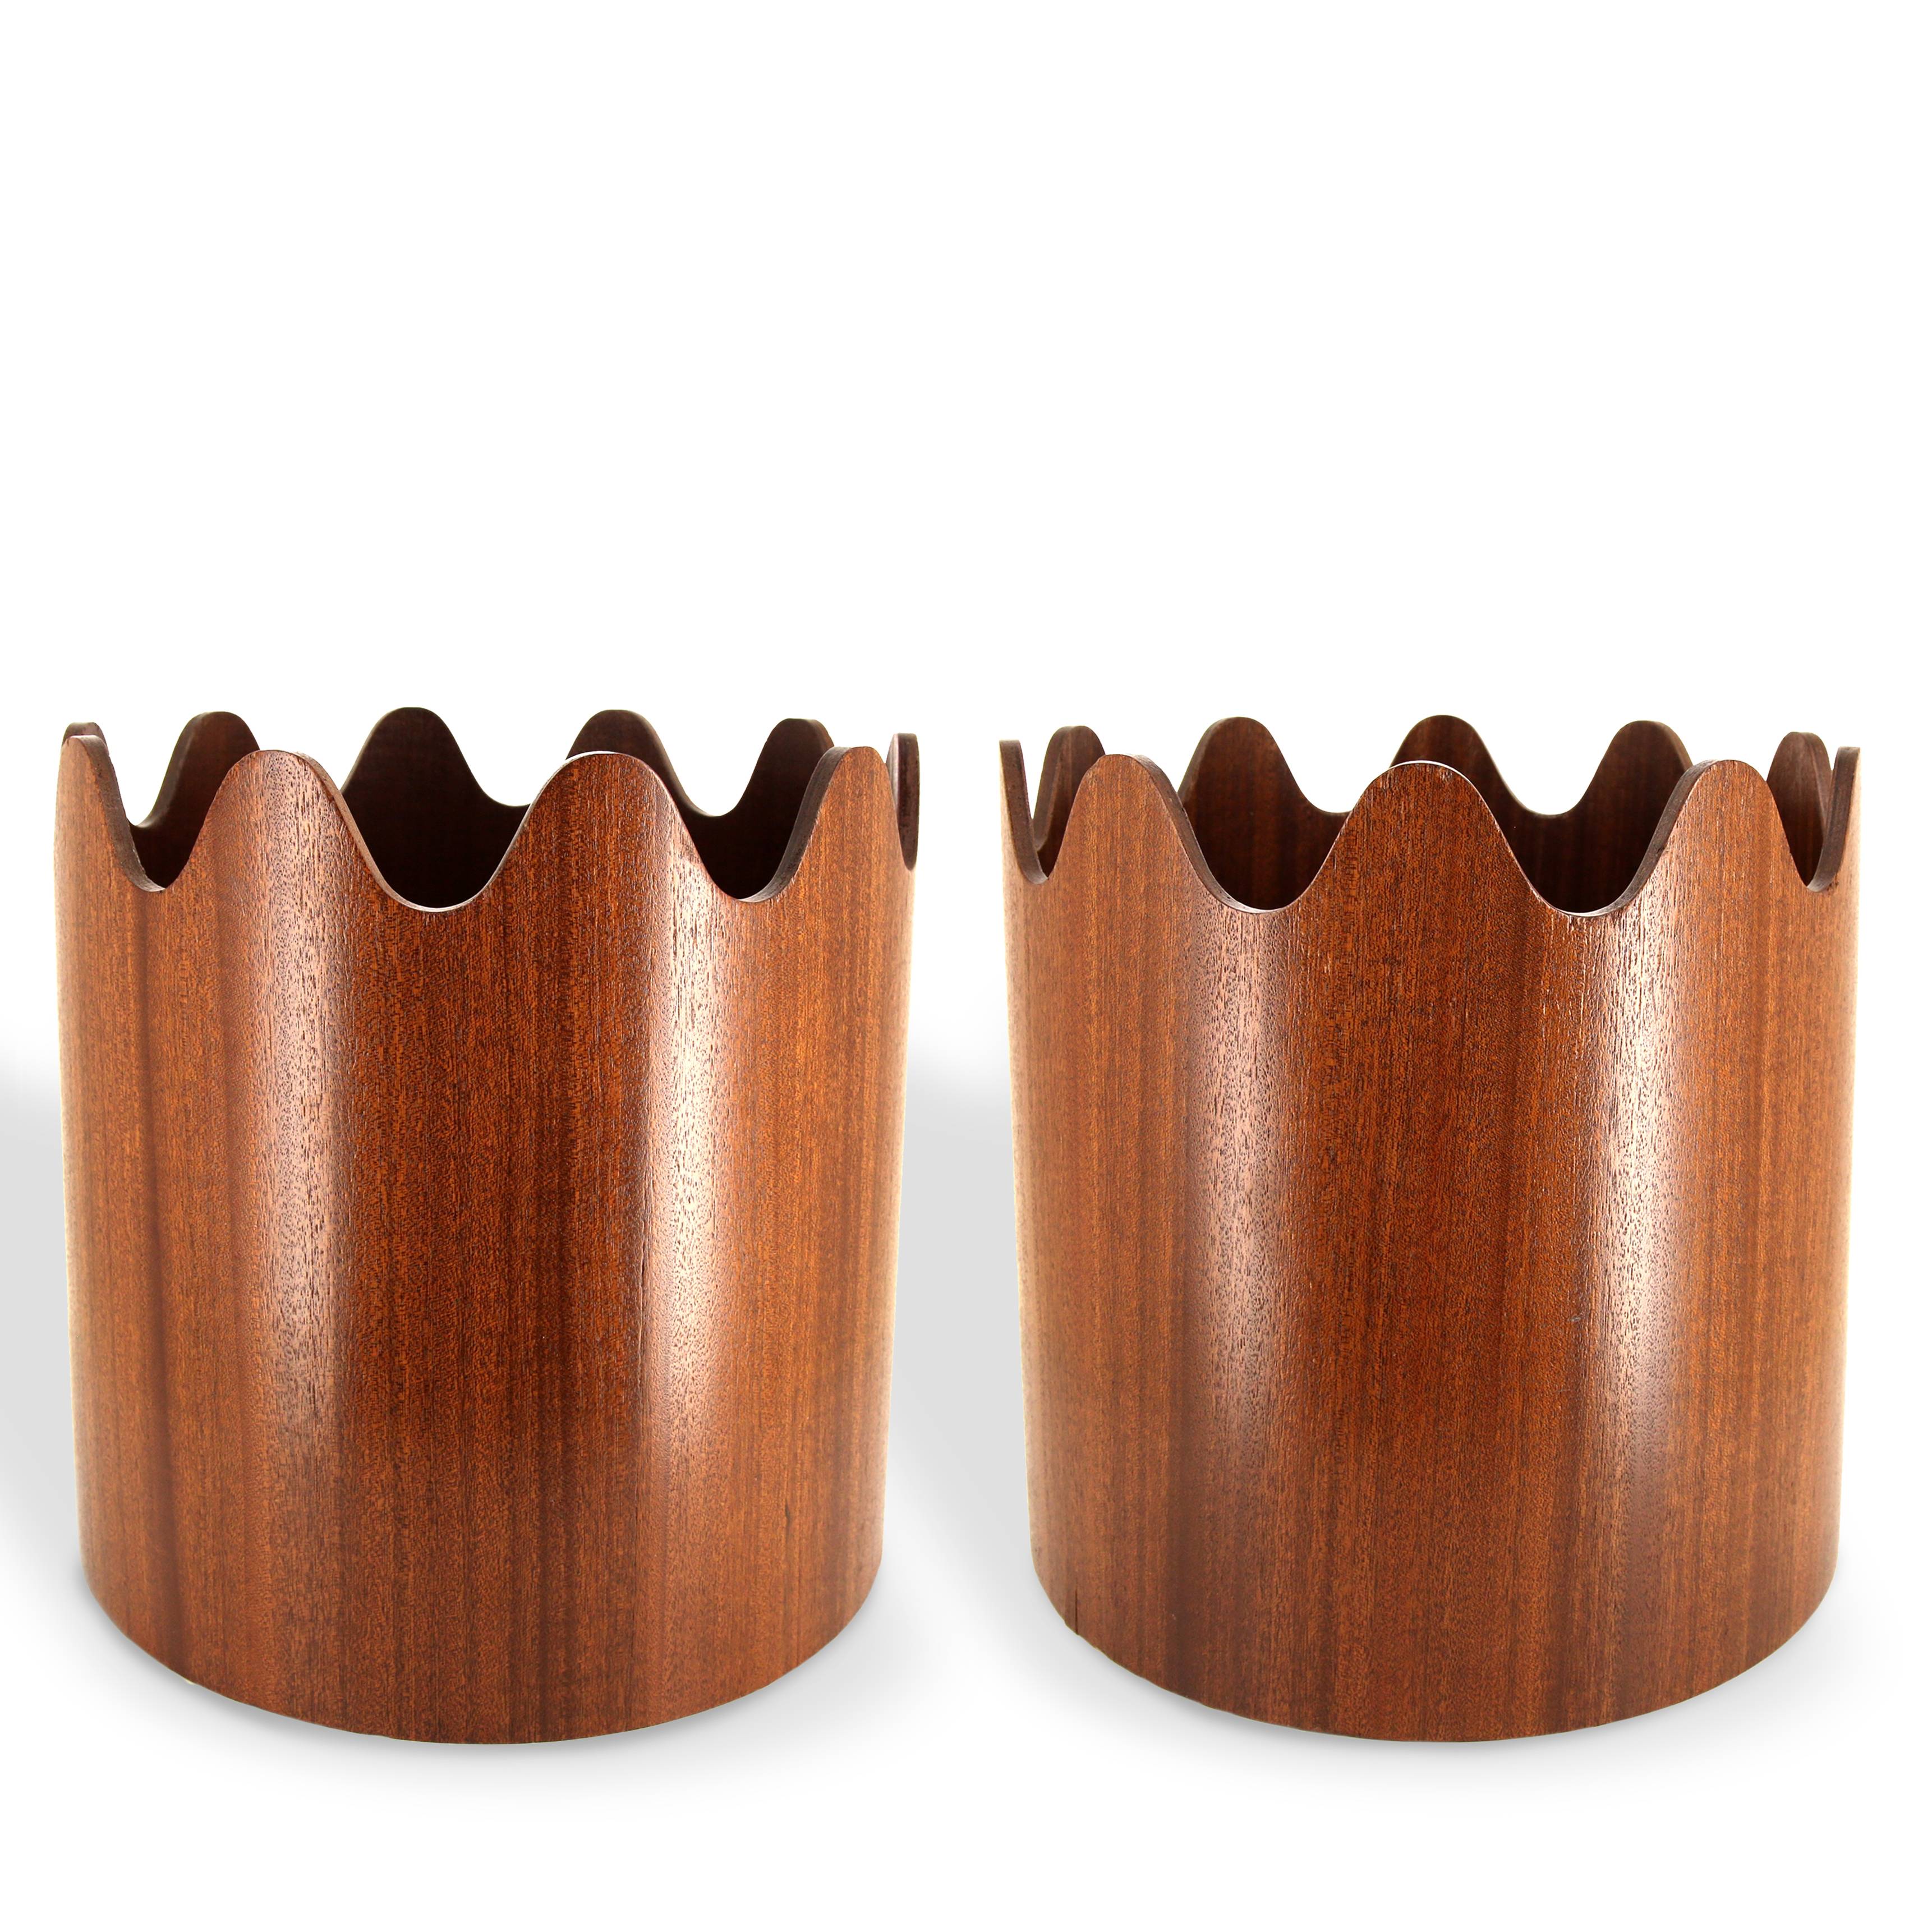 Pierluigi Ghianda, two prototypes of stackable pot covers, made of cherry wood, 1970s - 00pp